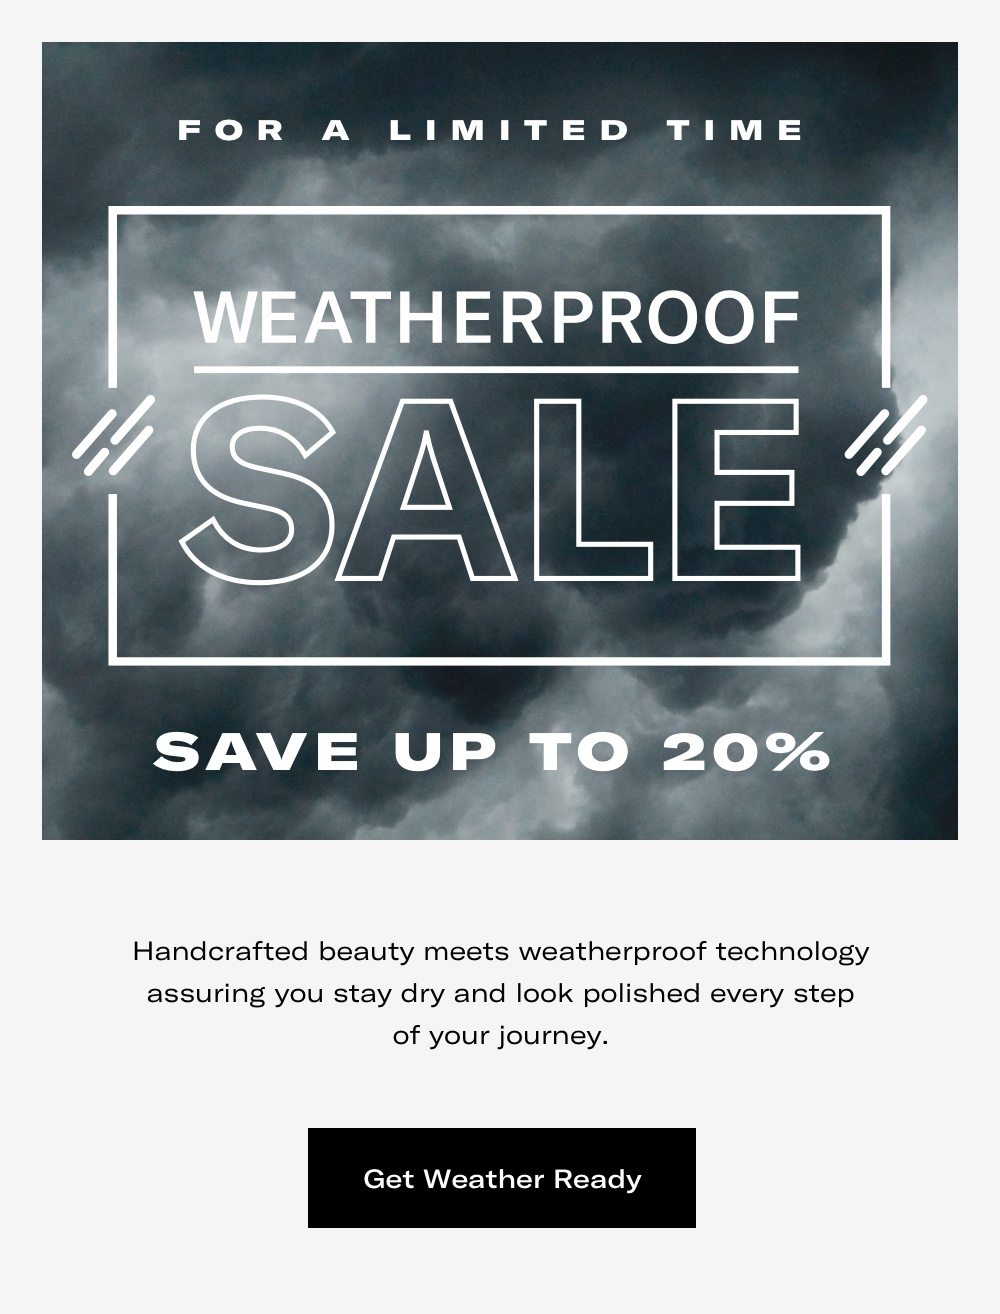 For a Limited Time - Weatherproof Sale - Save Up To 20%